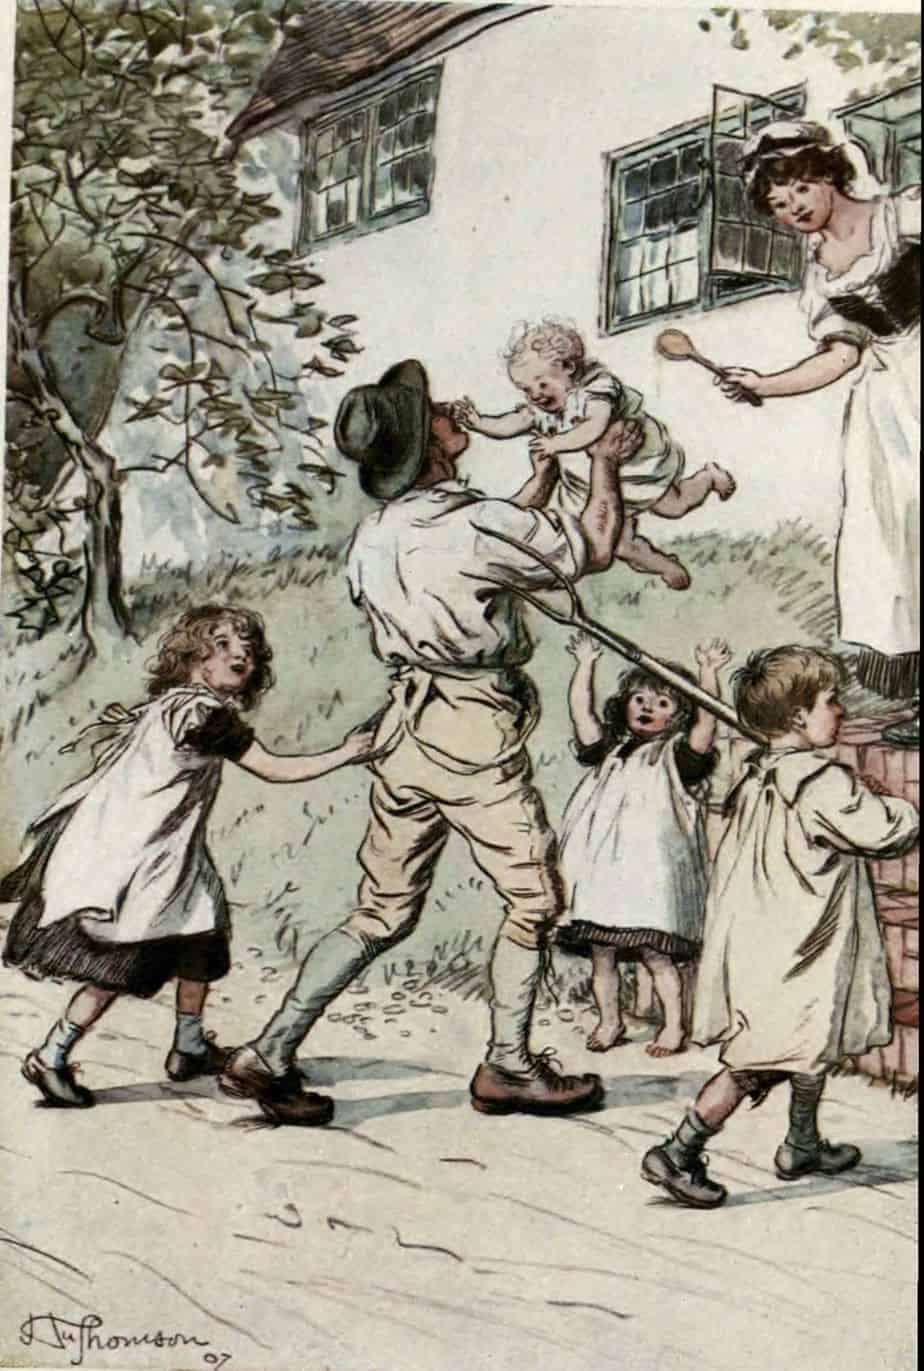 Illustration of 'The Father whose return is greeted by young voices' by Hugh Thomson, 1907 edition of Silas Marner